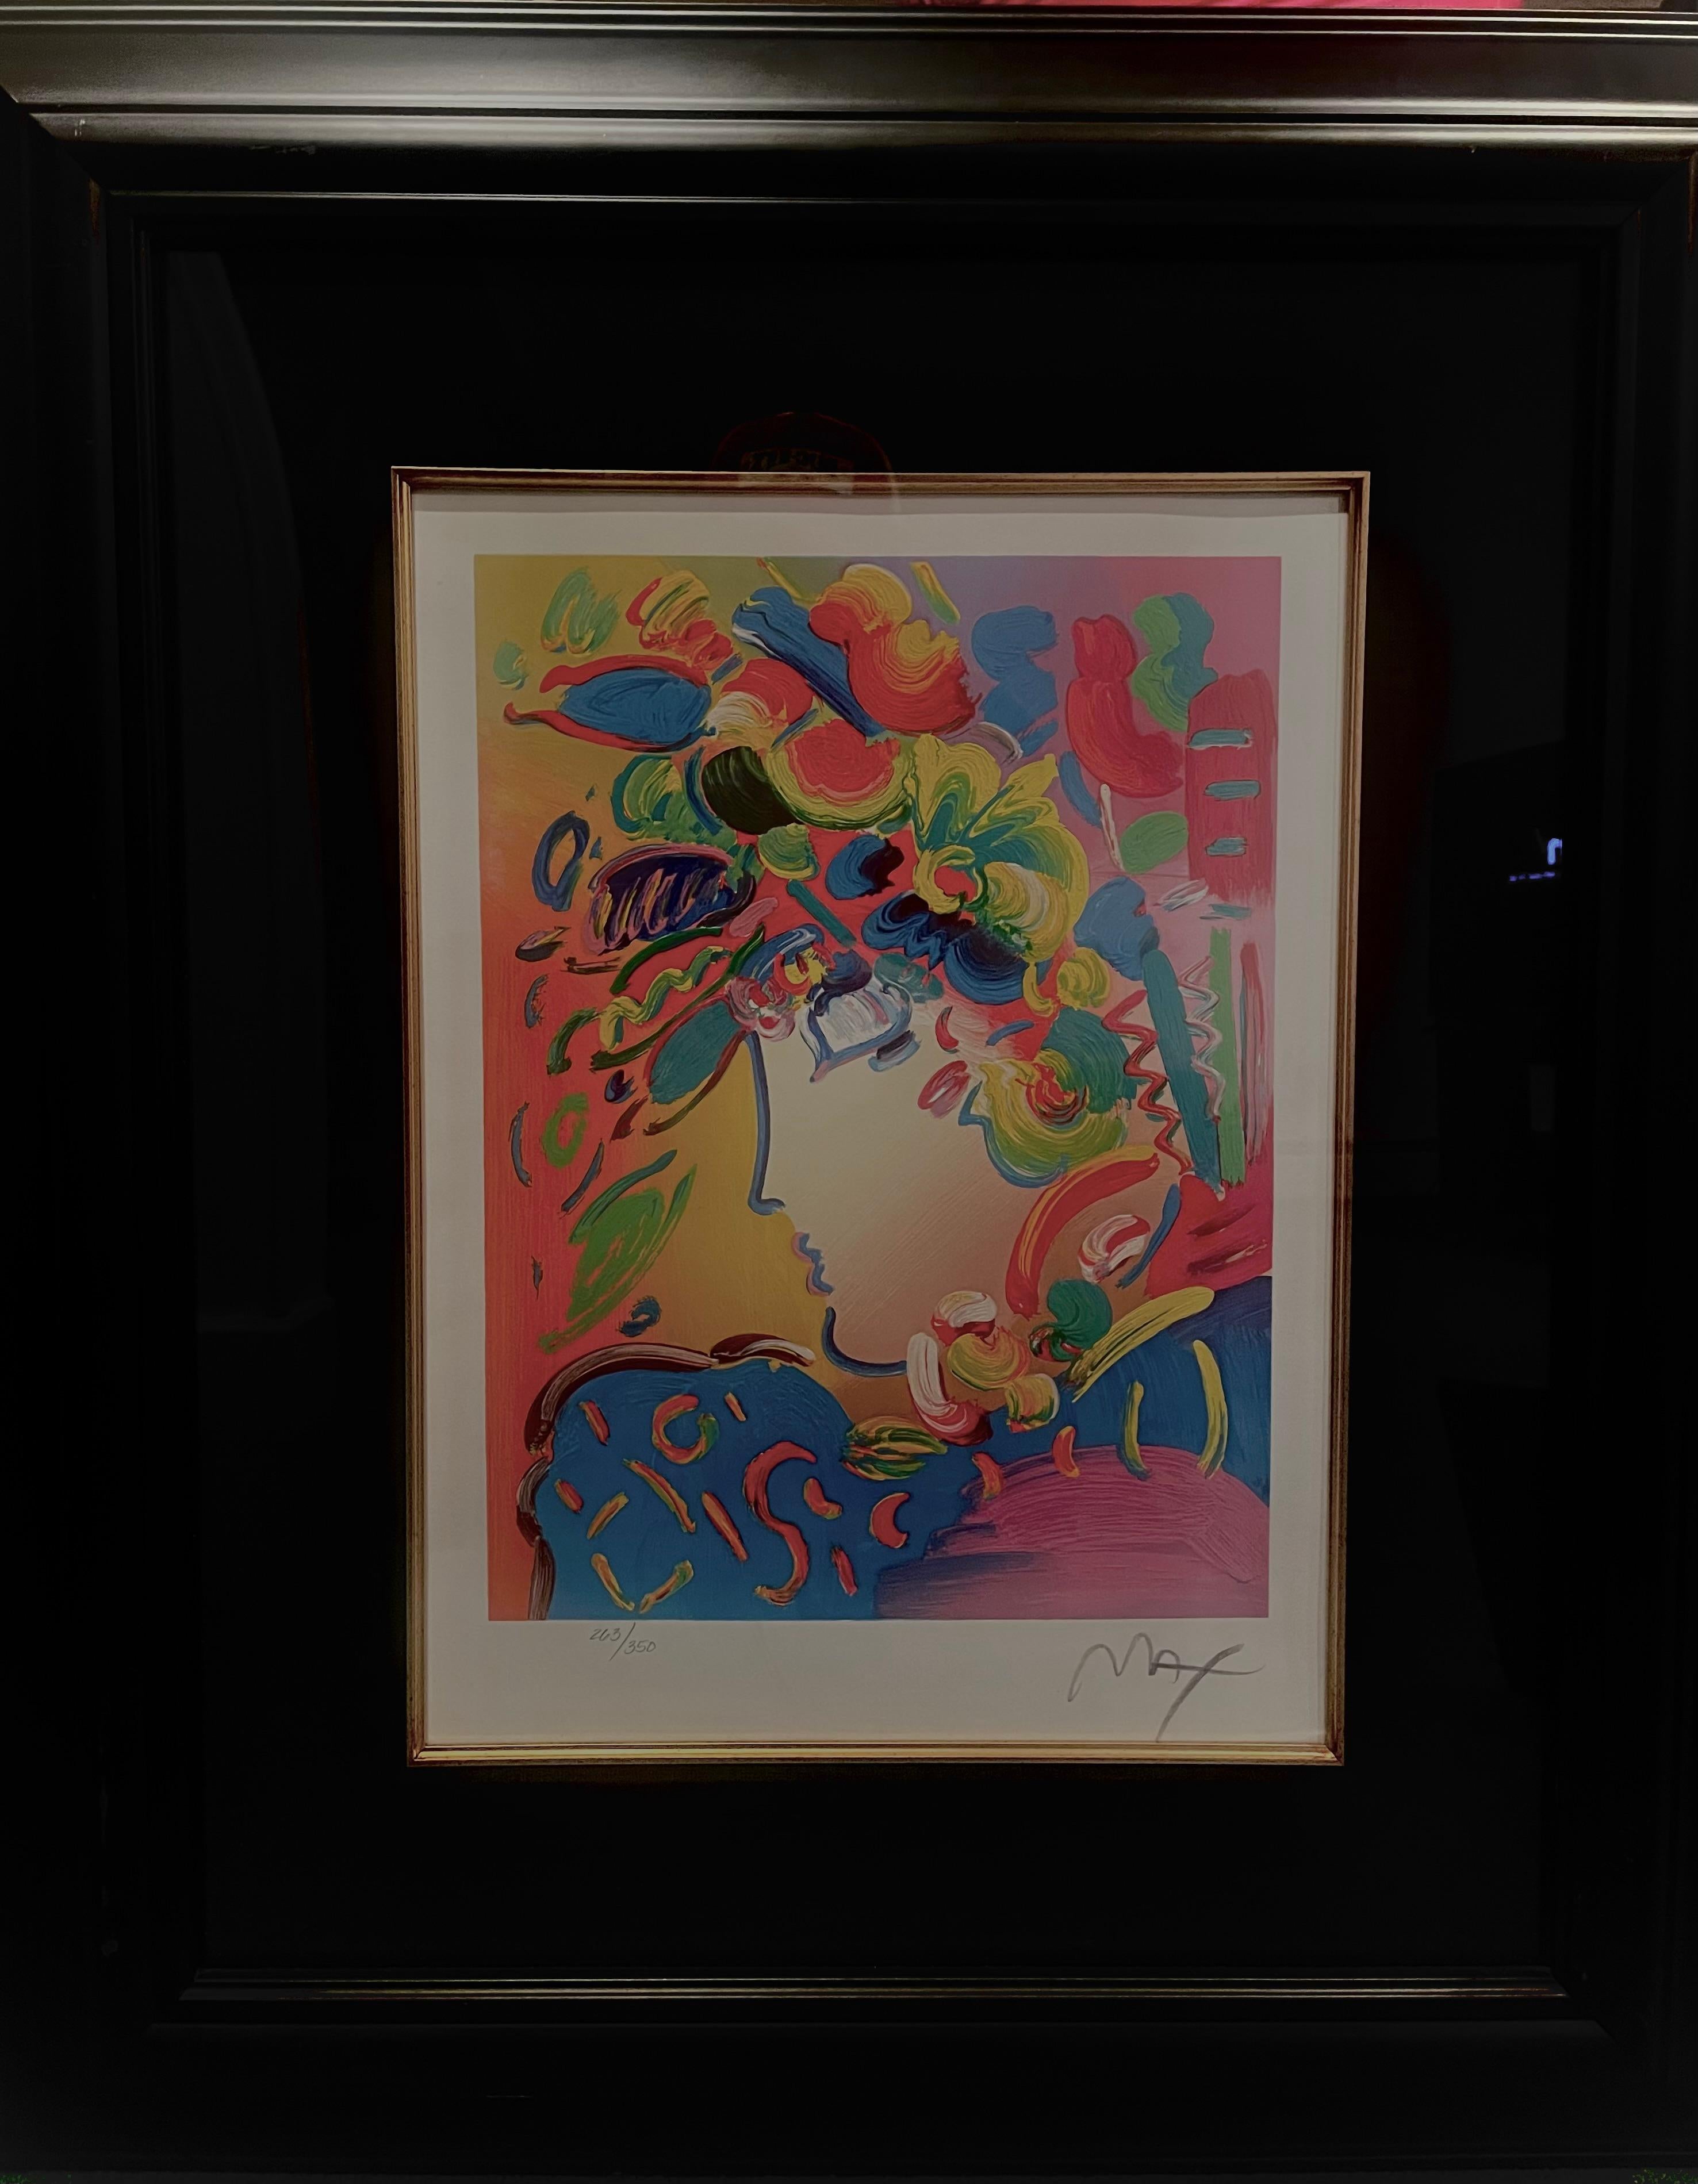 "Beauty" - Print by Peter Max